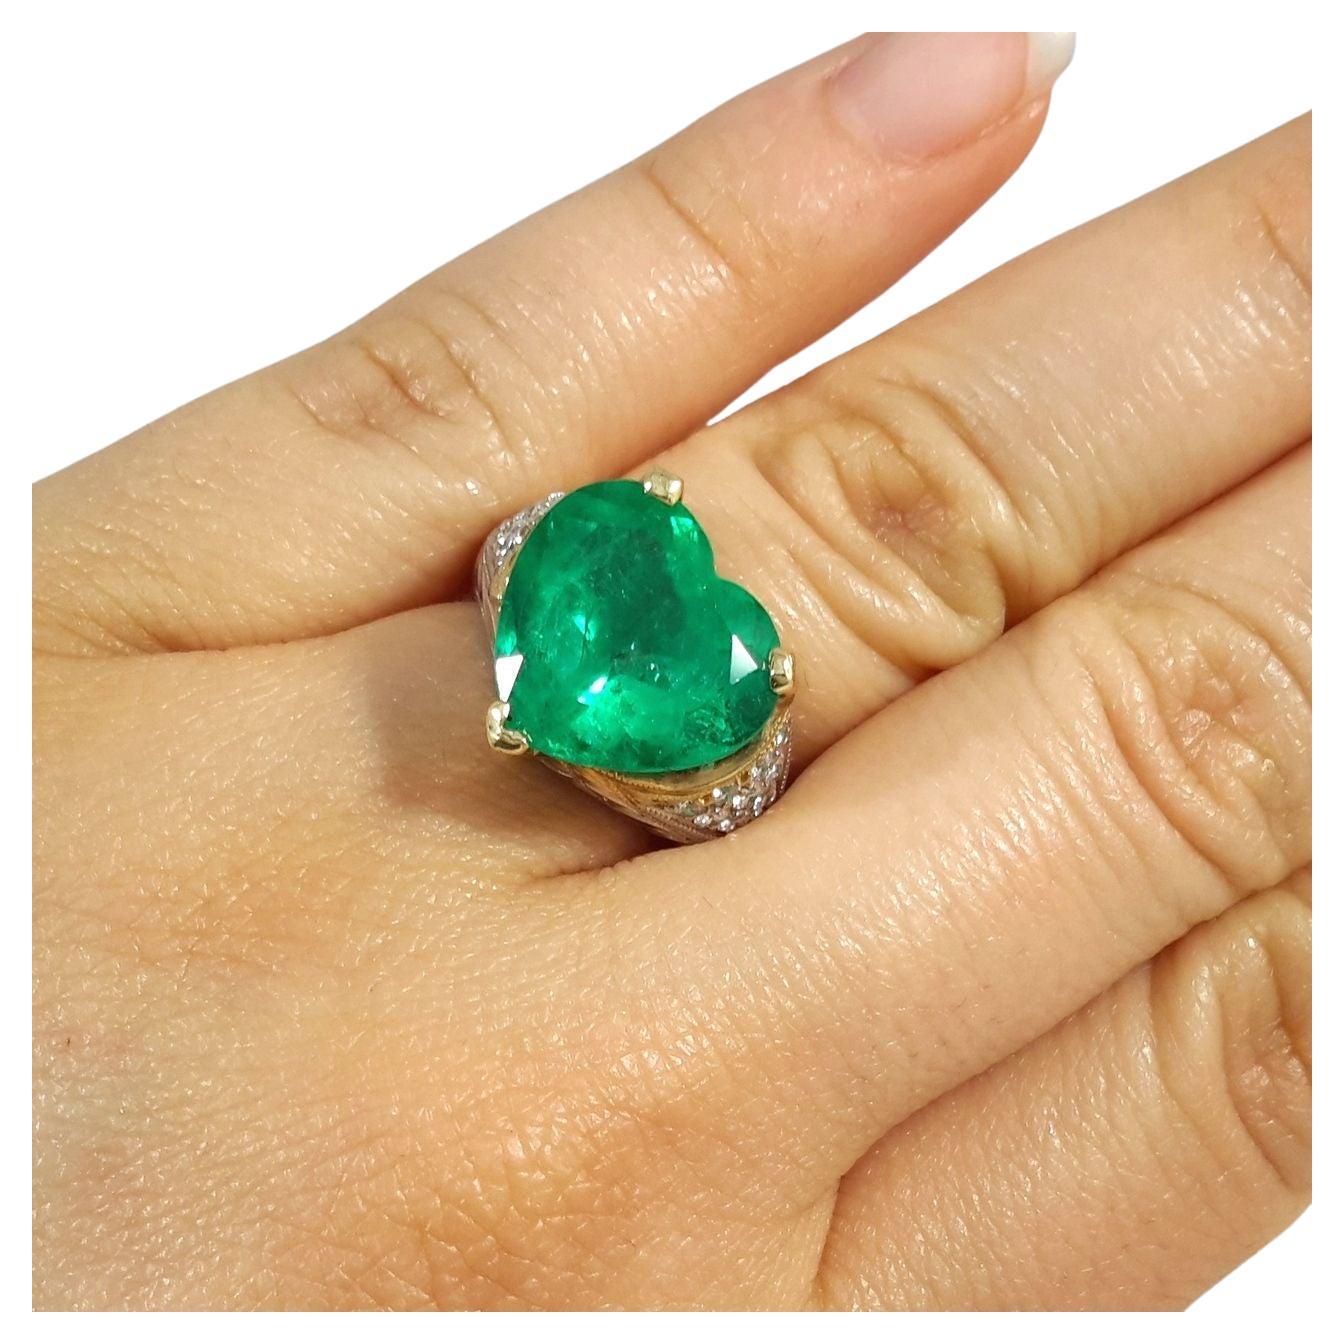 18K Two-Tone Heart-Shape Emerald Diamond Ring!

Indulge in the allure of our exquisite 18K Two-Tone Heart-Shape Emerald Diamond Ring, a perfect fusion of sophistication and timeless elegance.

Ring Highlights:
Metal: 18K Two-Tone Gold - A harmonious